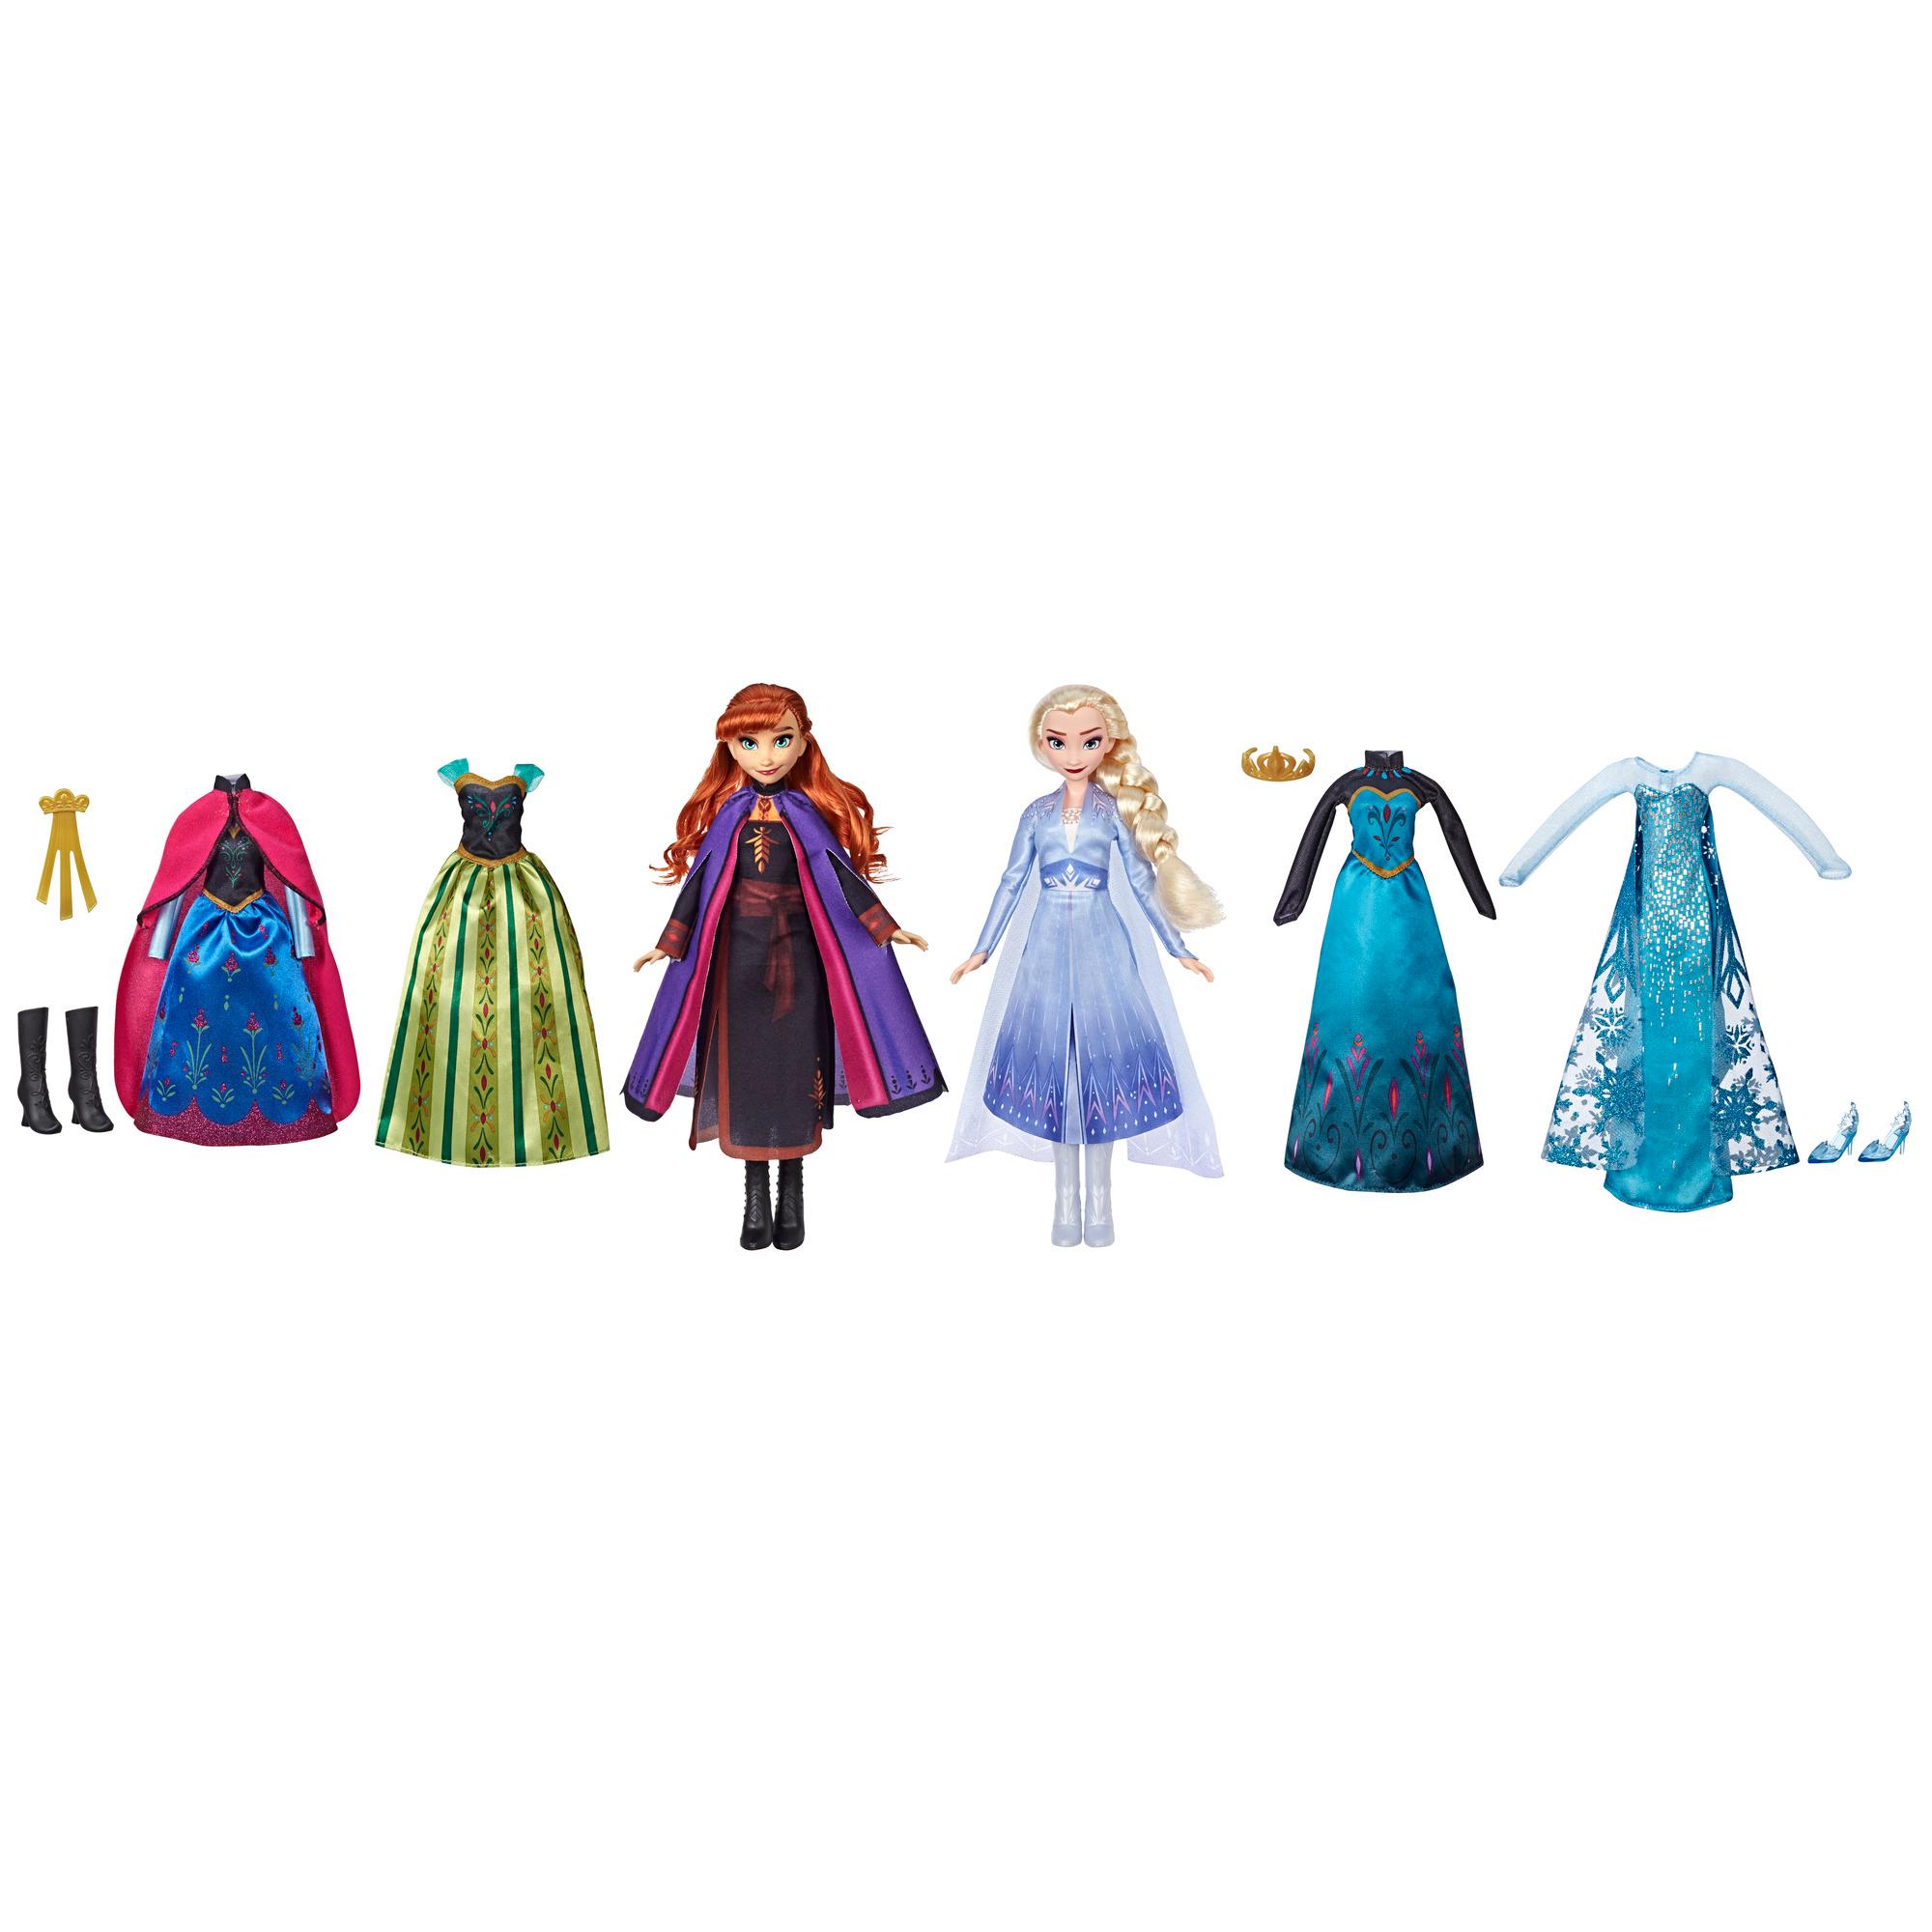 schaal AIDS karakter Frozen|Disney Frozen Fashion Set, Anna and Elsa Fashion Dolls with 6  Outfits, Toy for Girls 3 and Up